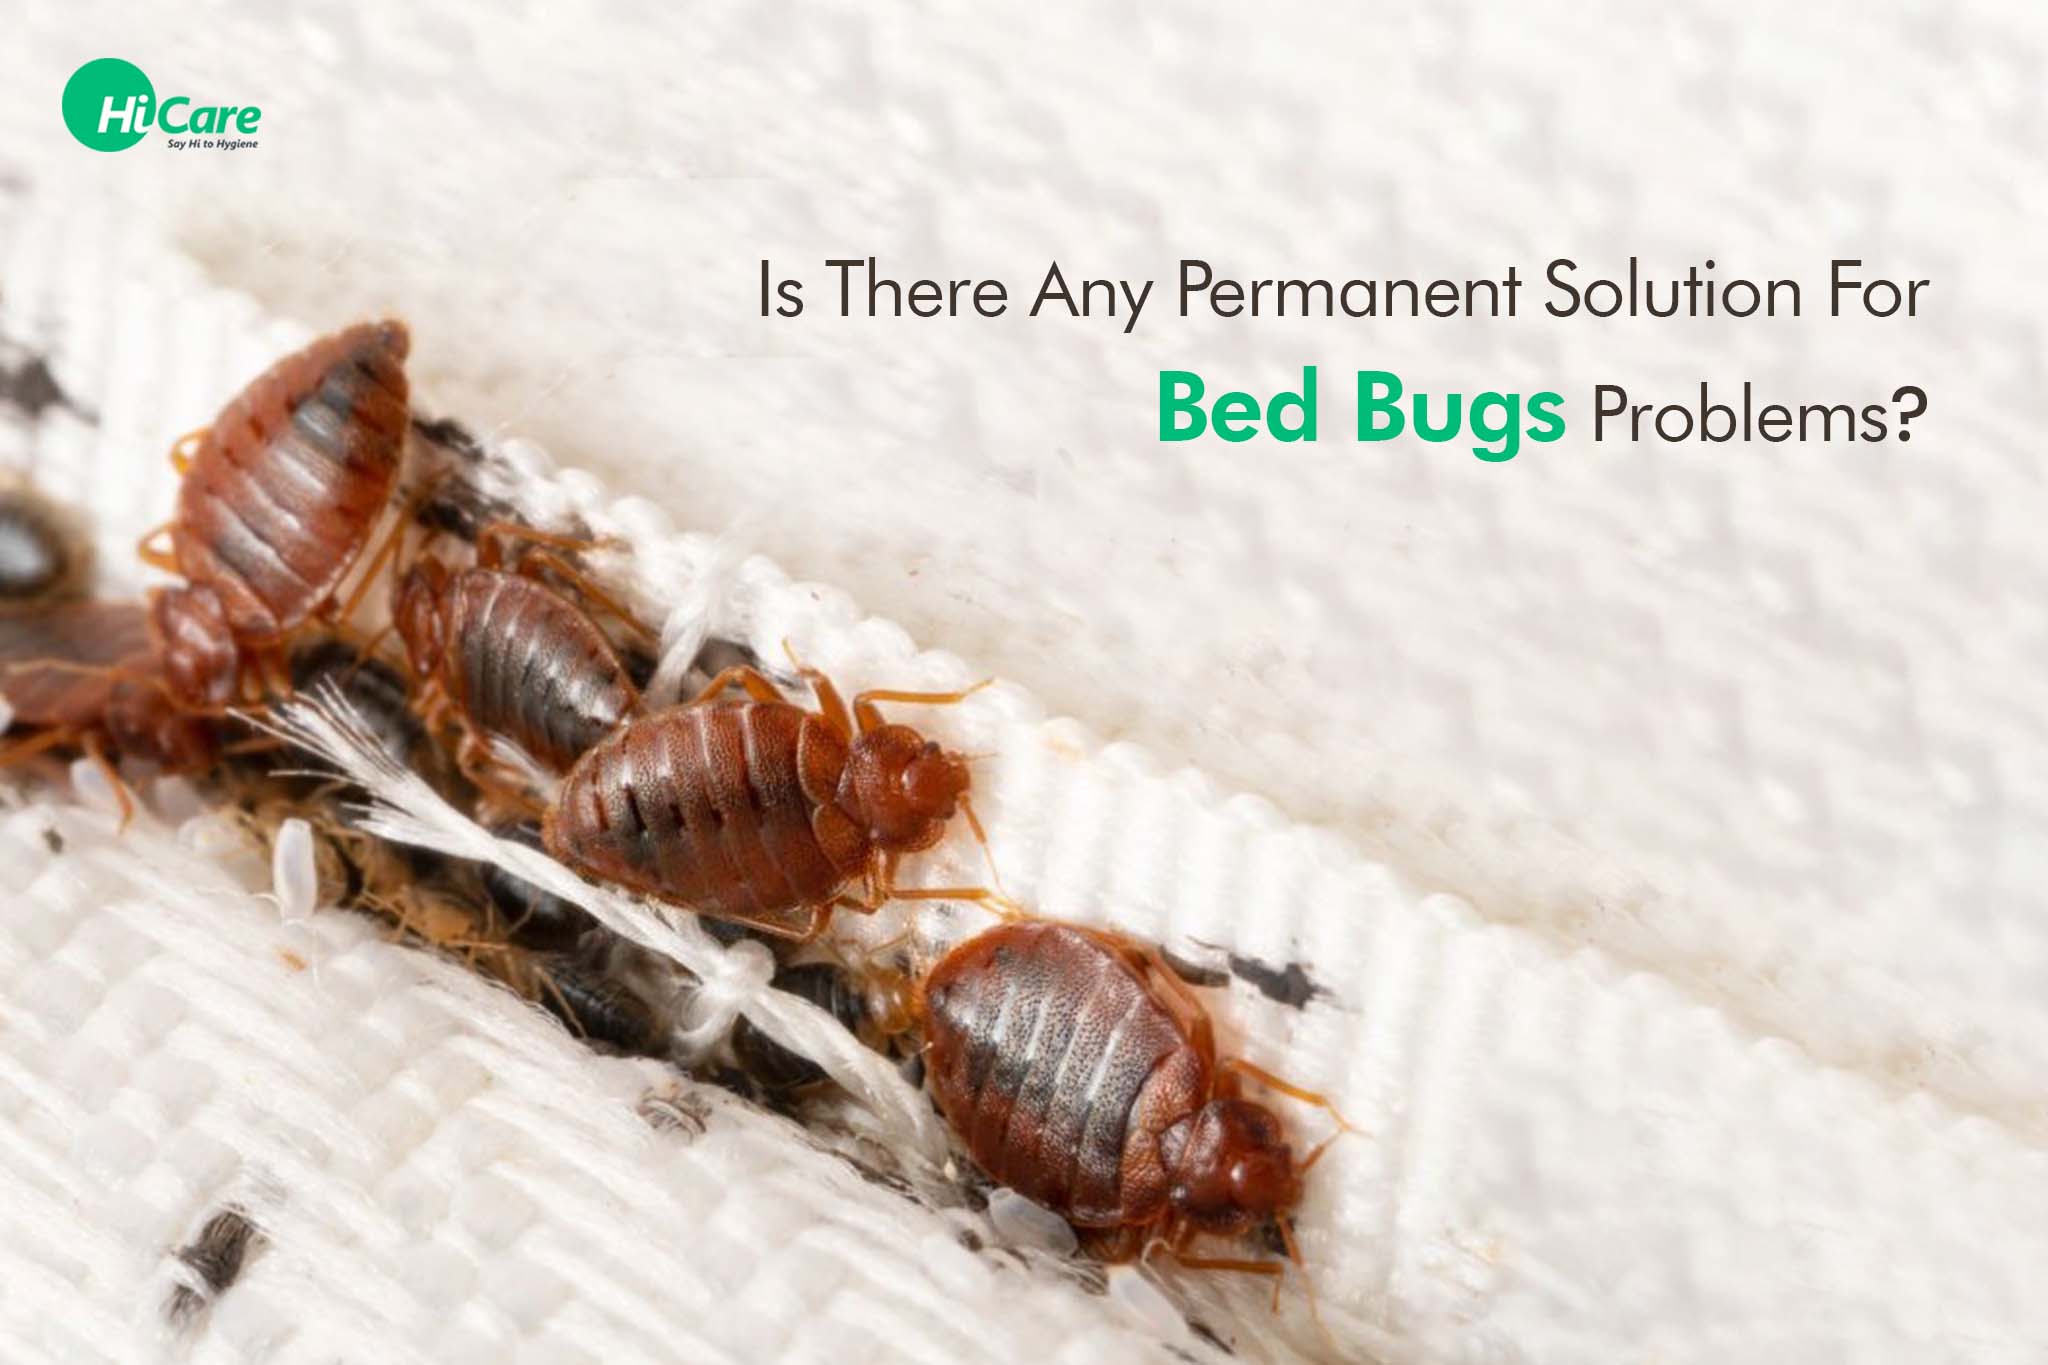 How to Get Permanent Solution for Bed Bugs?